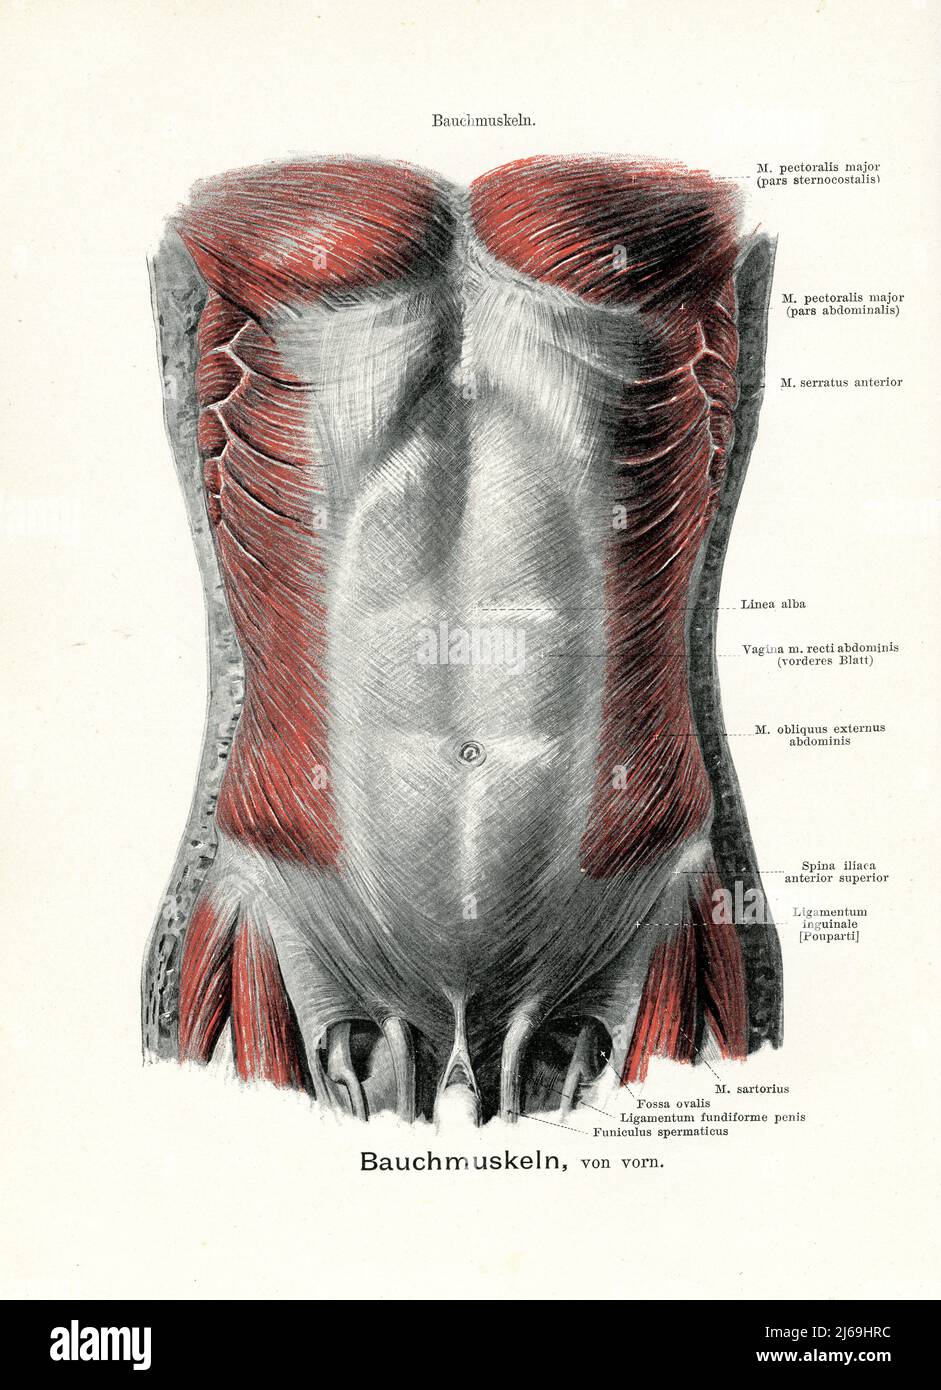 Vintage illustration of anatomy, frontal view of the abdominal musculature with German anatomical descriptions Stock Photo